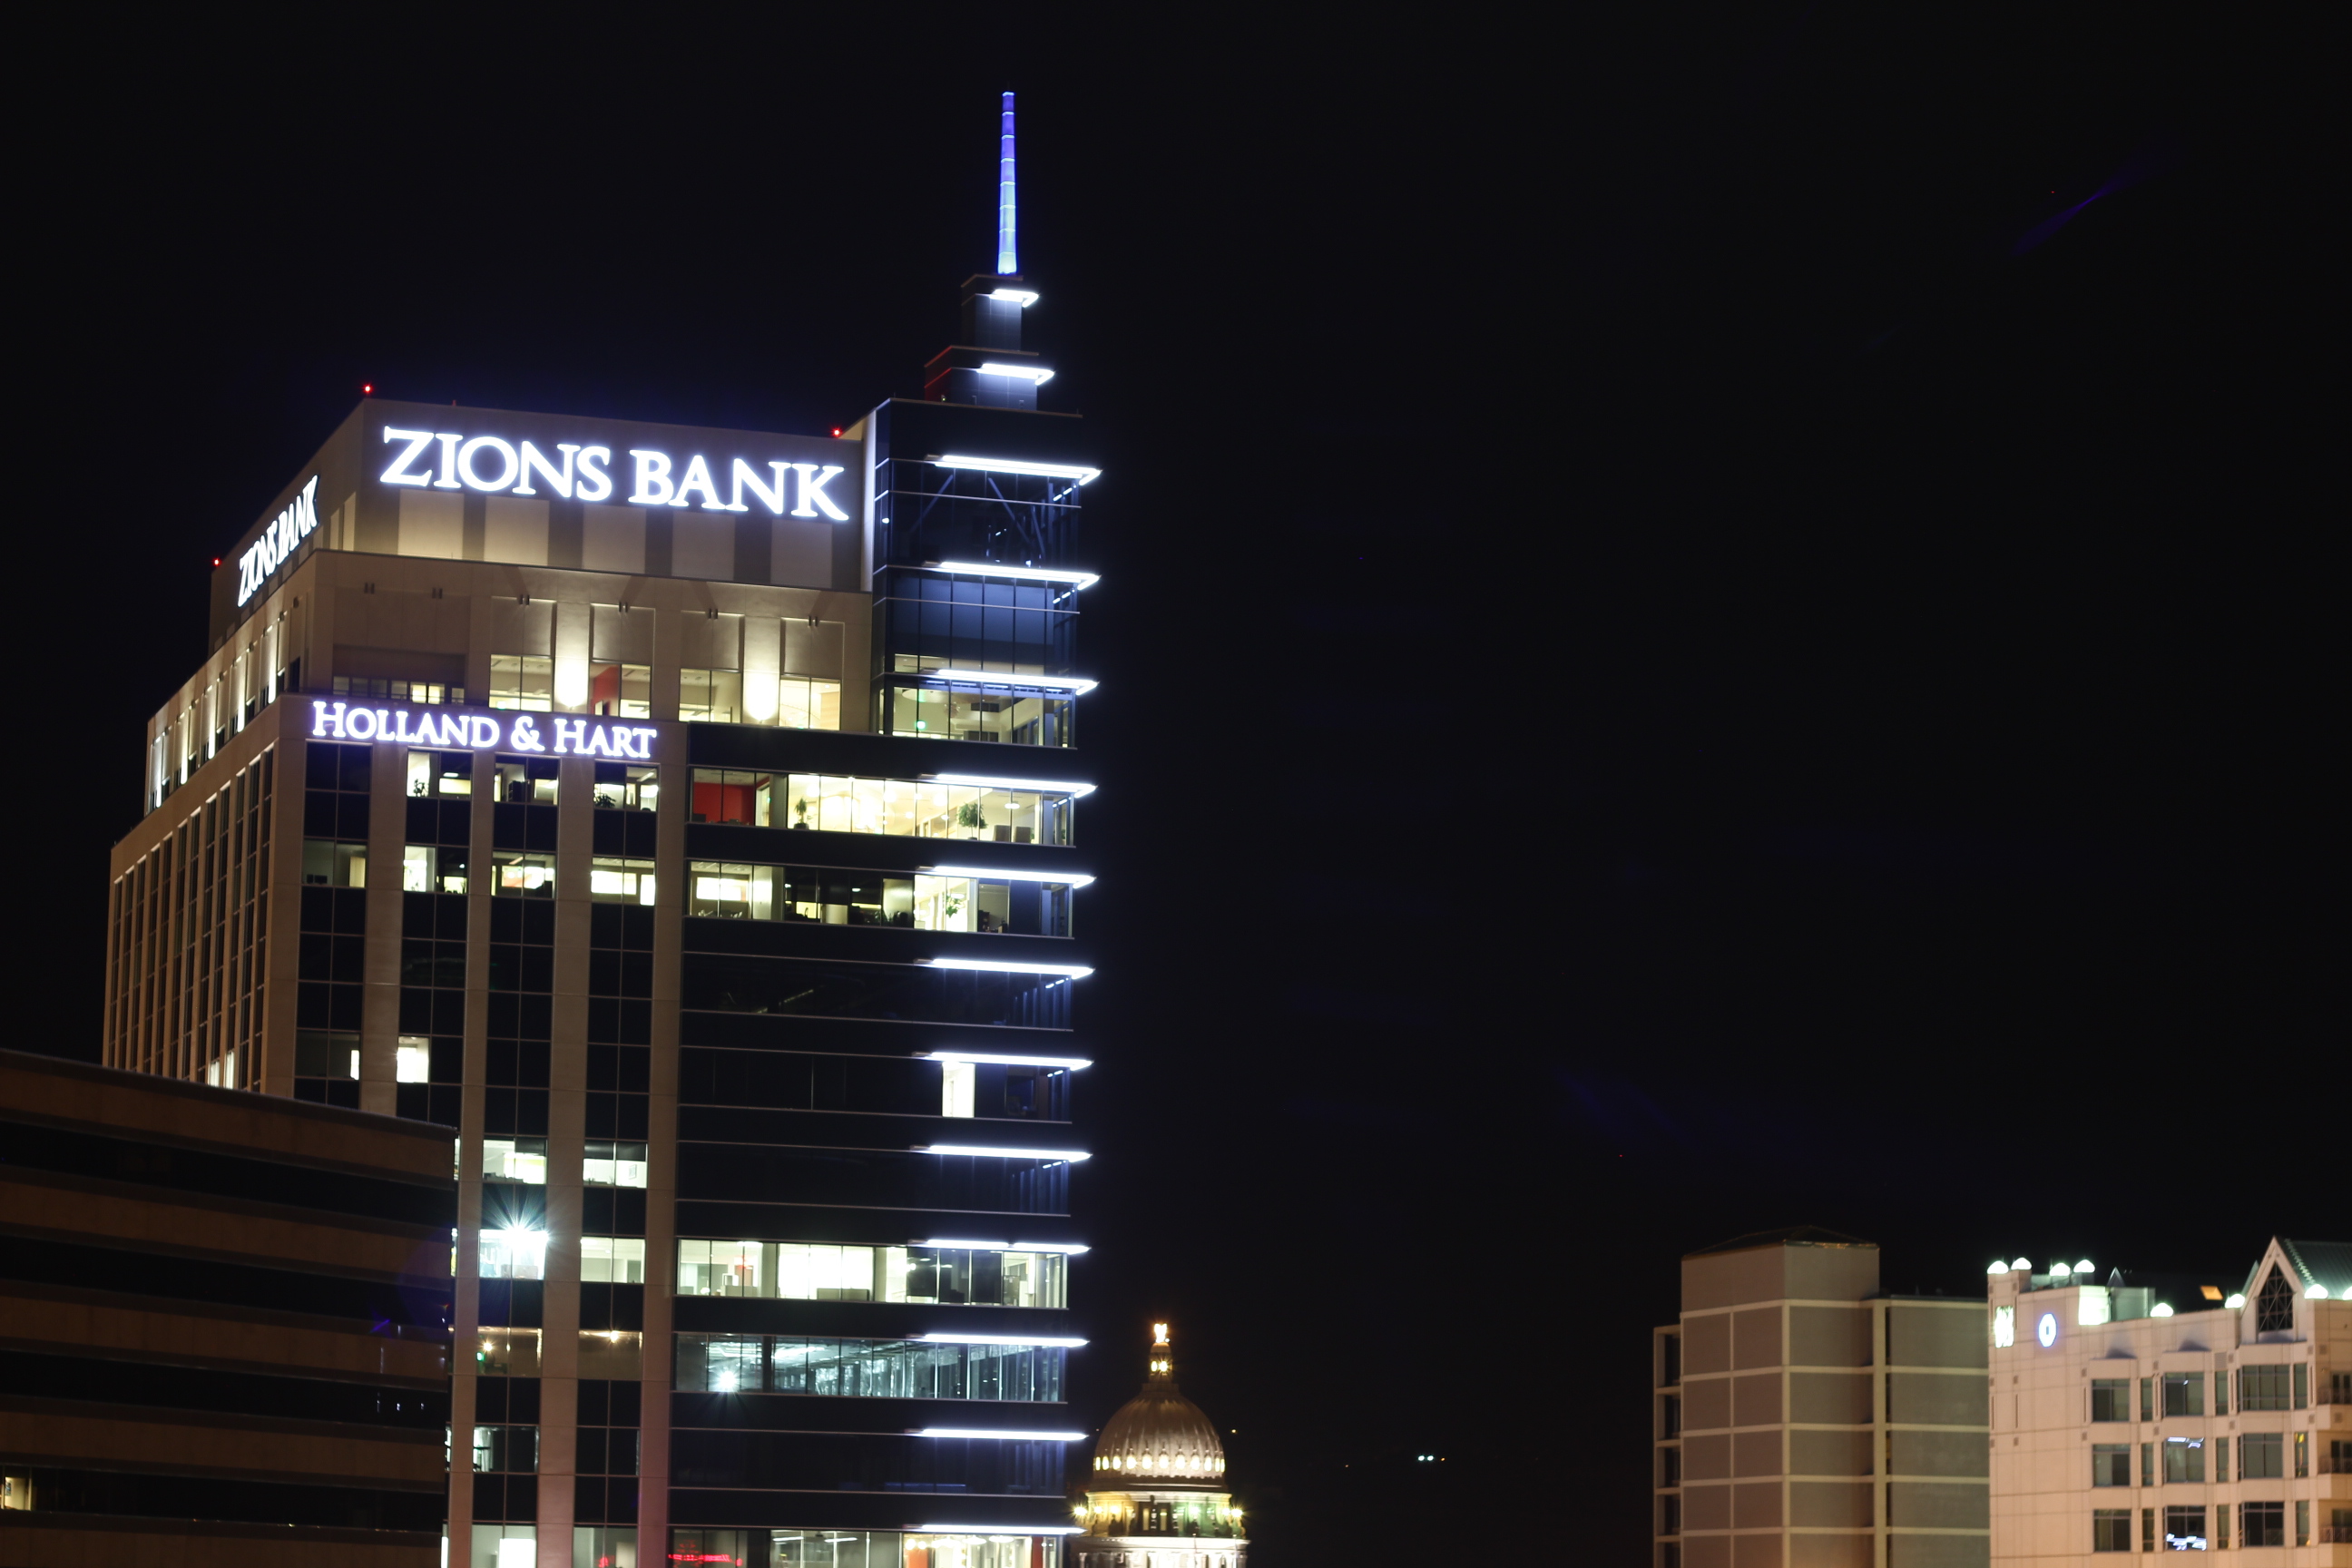 File:Zions Bank Building Before Dawn.JPG - Wikimedia Commons